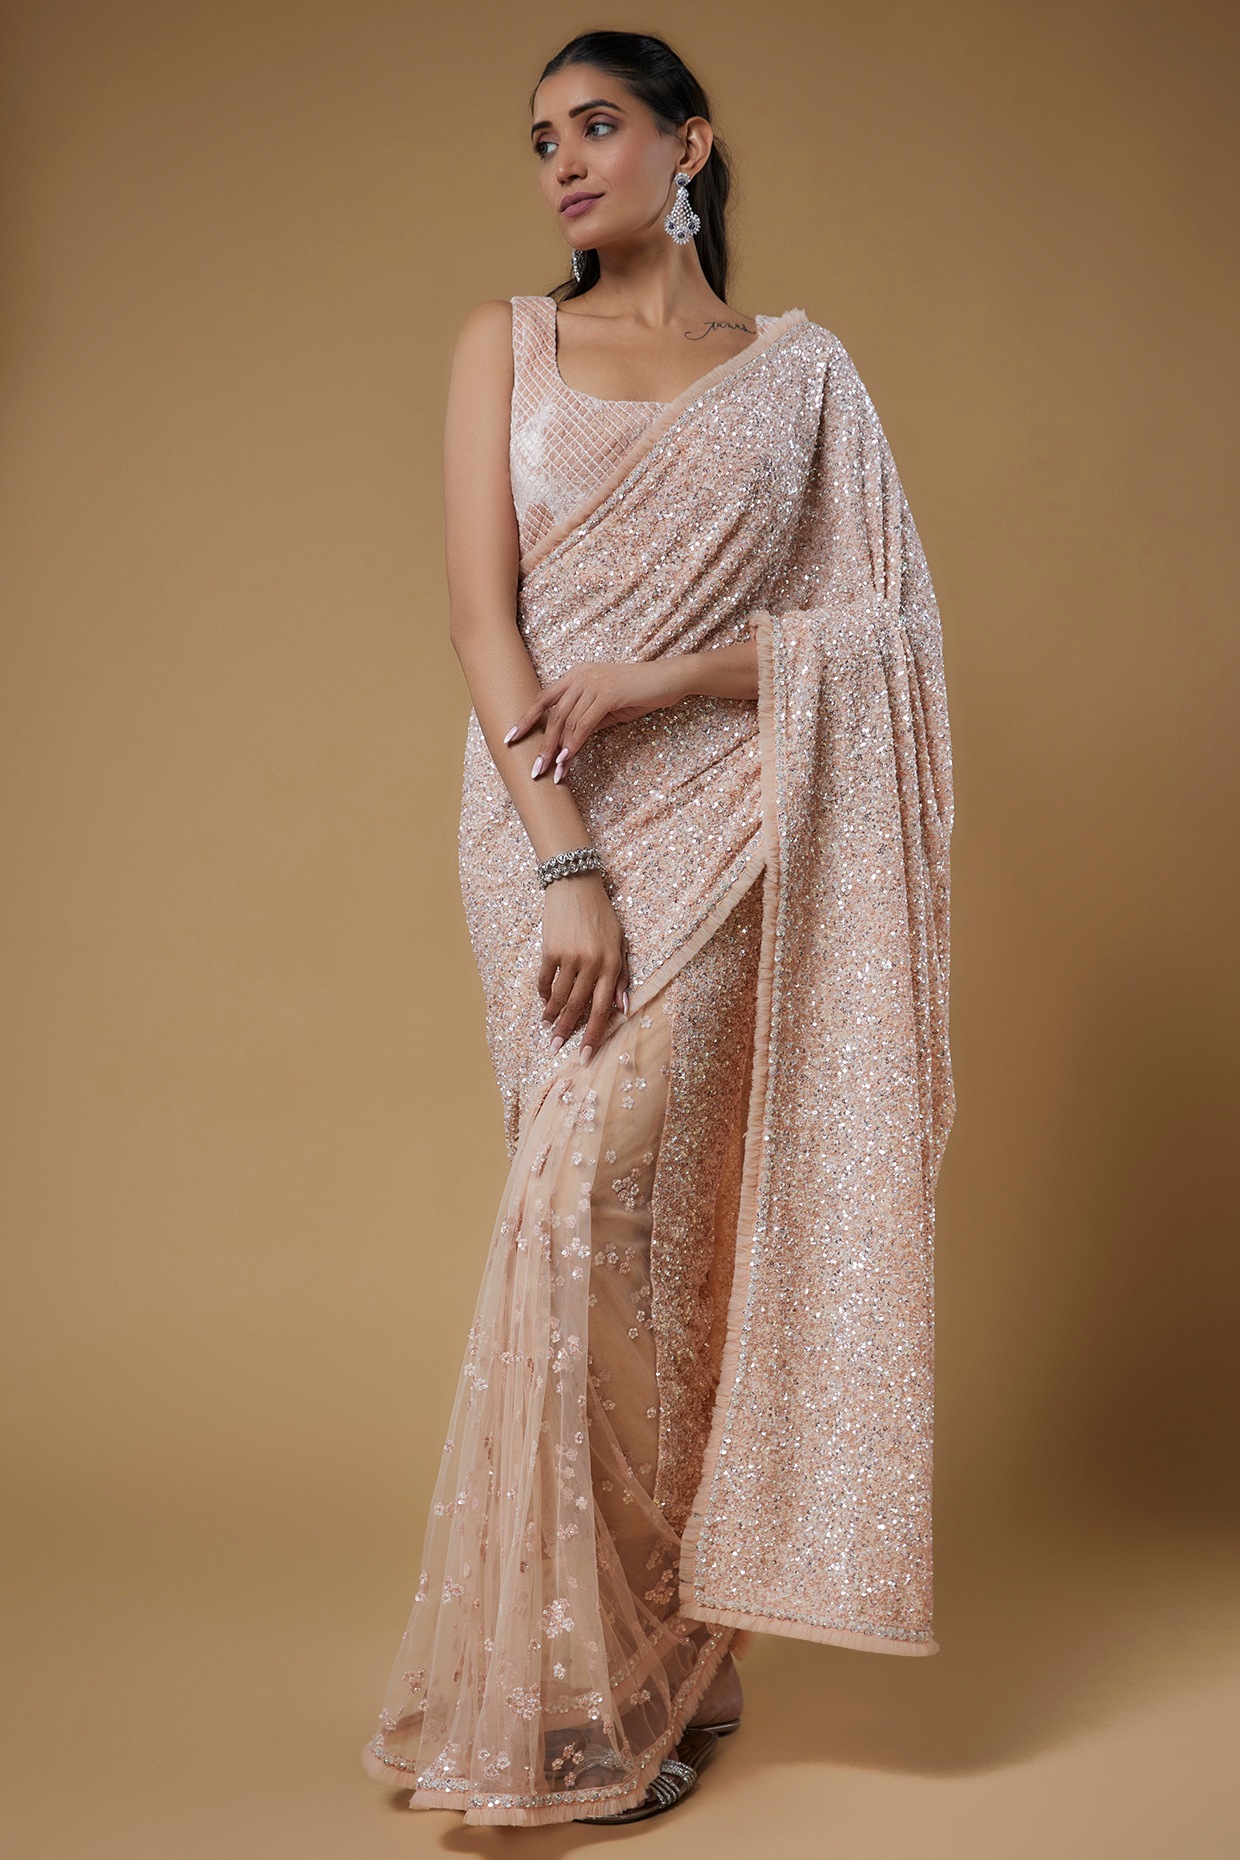 New Launched Peach Colored Partywear Designer Sequin Saree | simplysaris